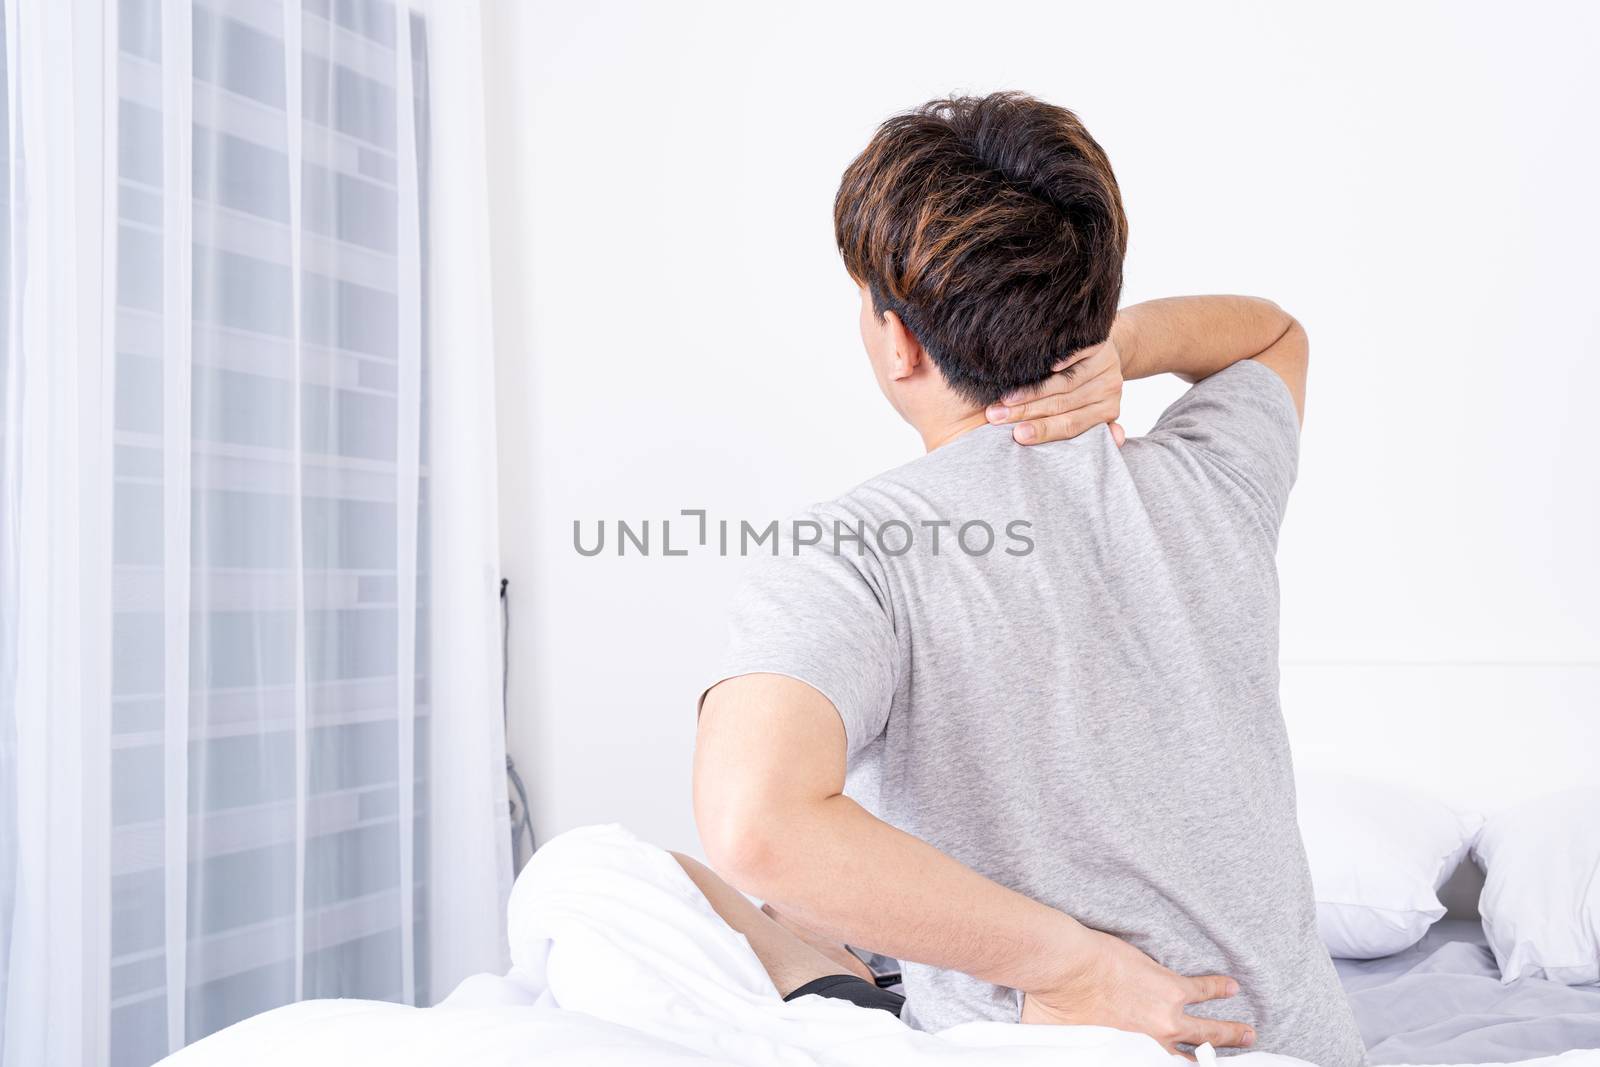 Young man suffering neck and back pain from uncomfortable bed. Healthcare medical or daily life concept. by mikesaran